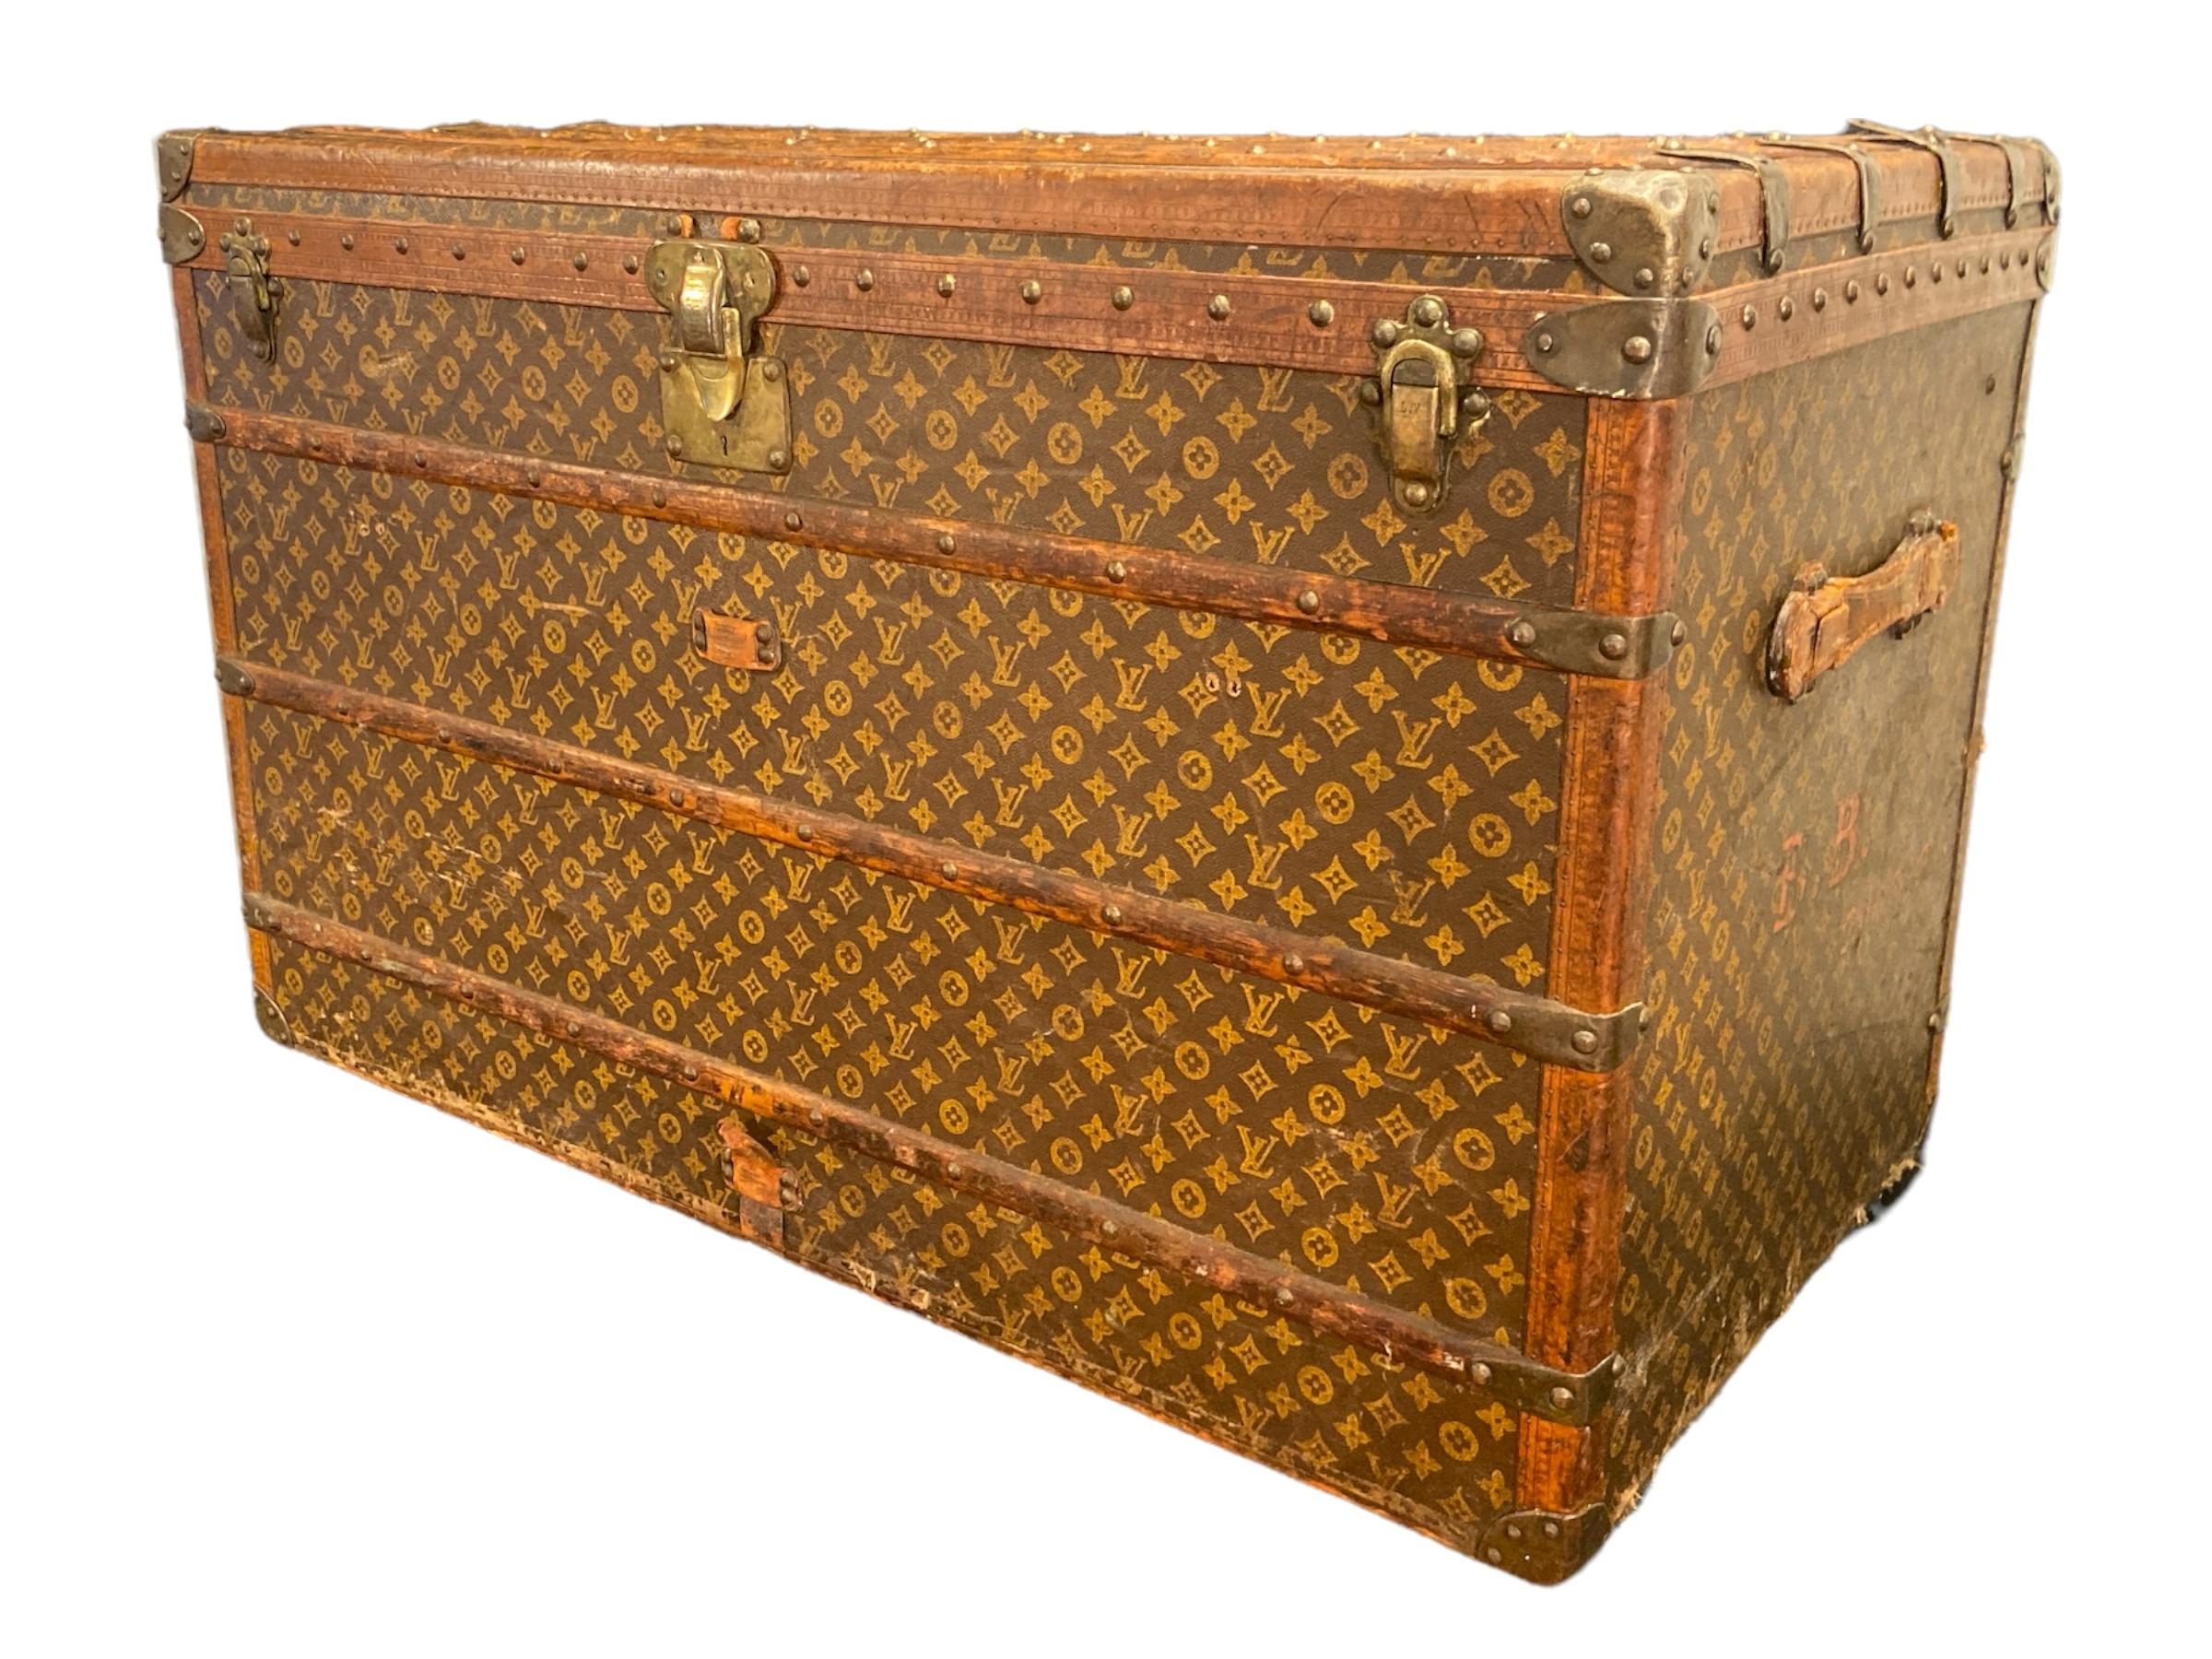 Louis Vuitton Classic Monogram Steamer Trunk, Early 1900's